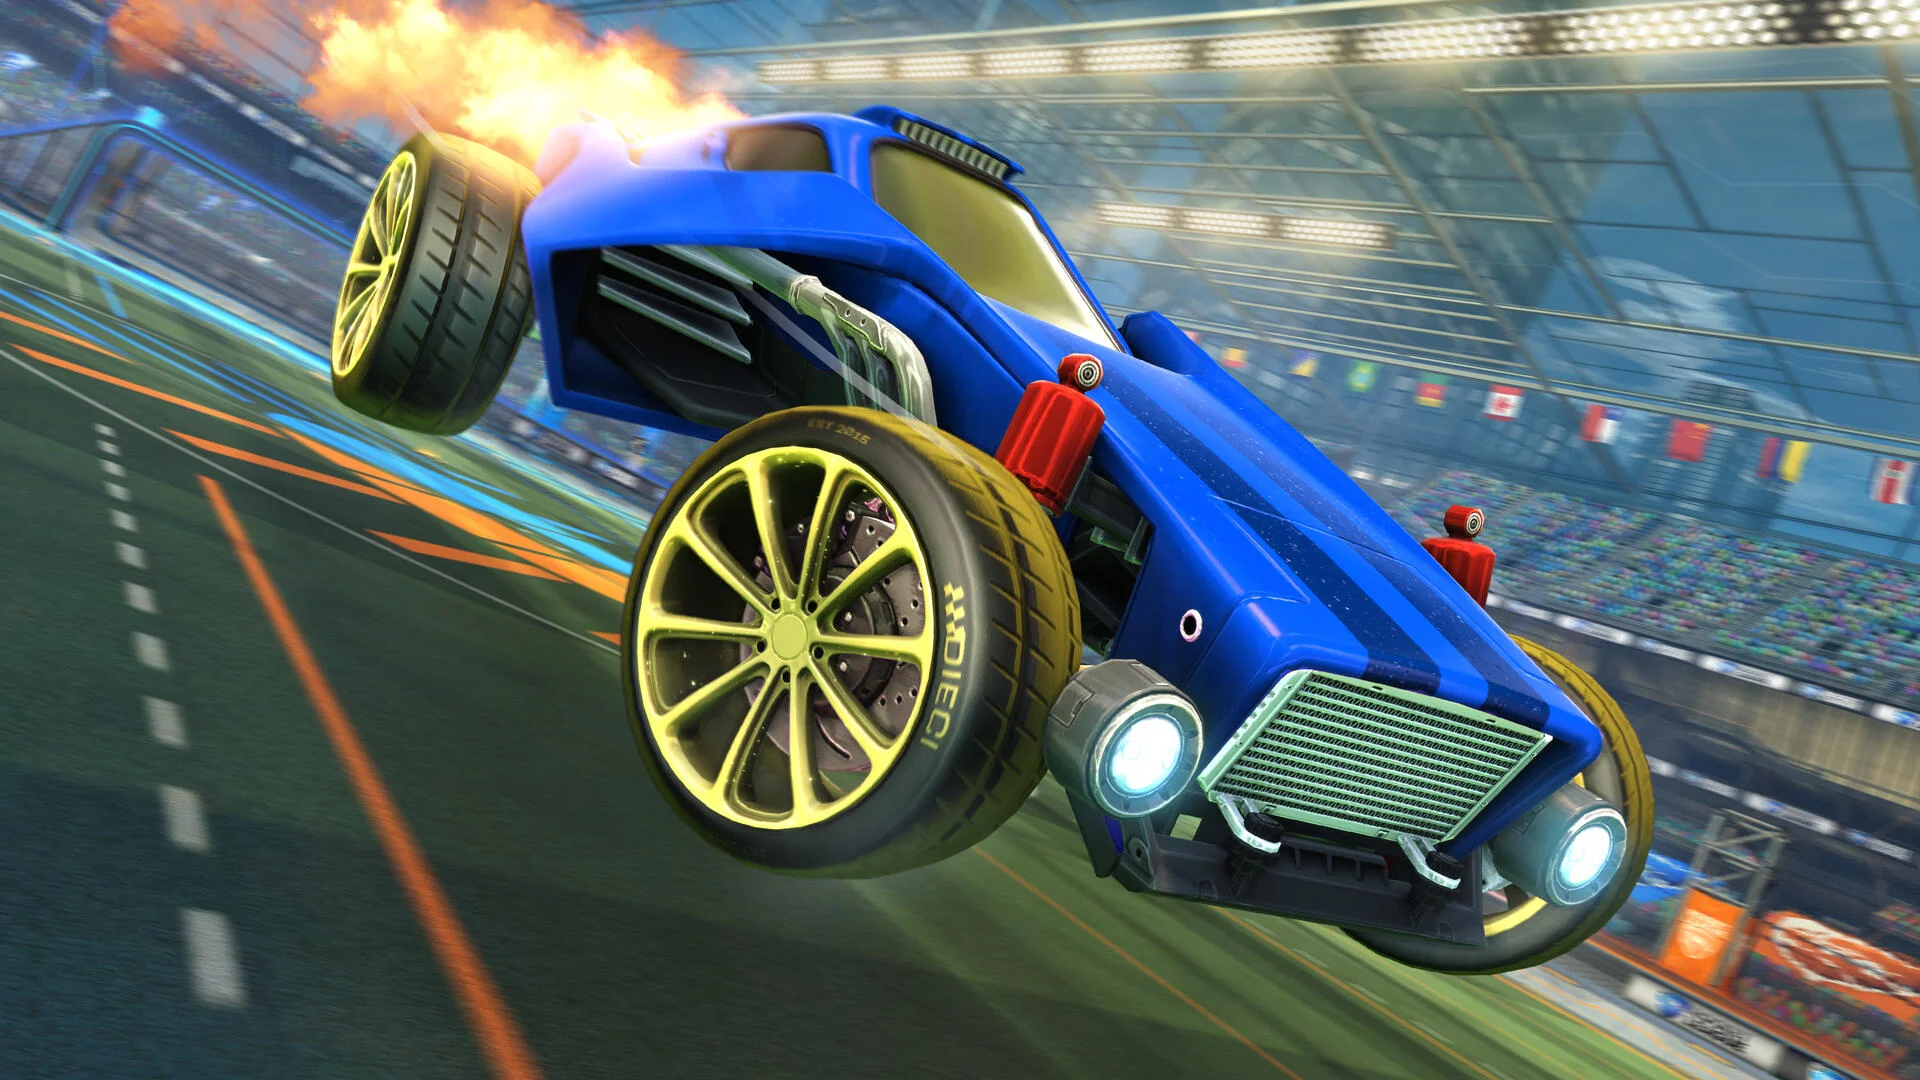 Rocket League S September Update Adds Epic Games Linking Cross Platform Progression Ahead Of Free To Play Dot Esports